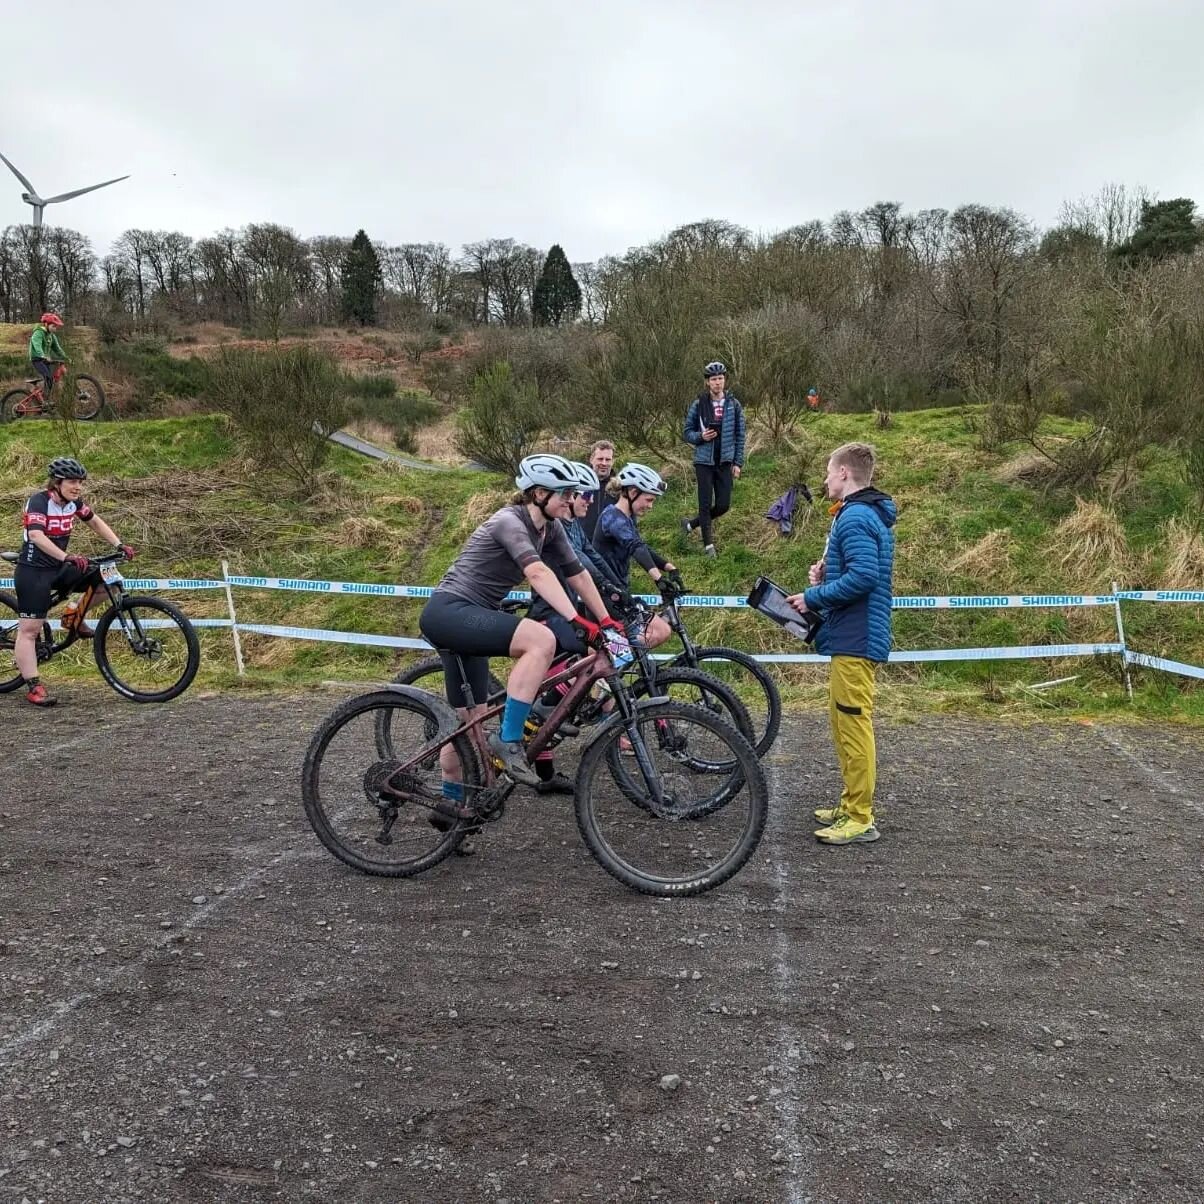 We were at Cathkin Brae for R1 of the @sxc.mtbseries!
Great course to start the season, some tough climbing followed by a flowing descent with plenty of B-line options.

Round 2 is at Lochore Meadows in May so plenty time to get ready for the next on